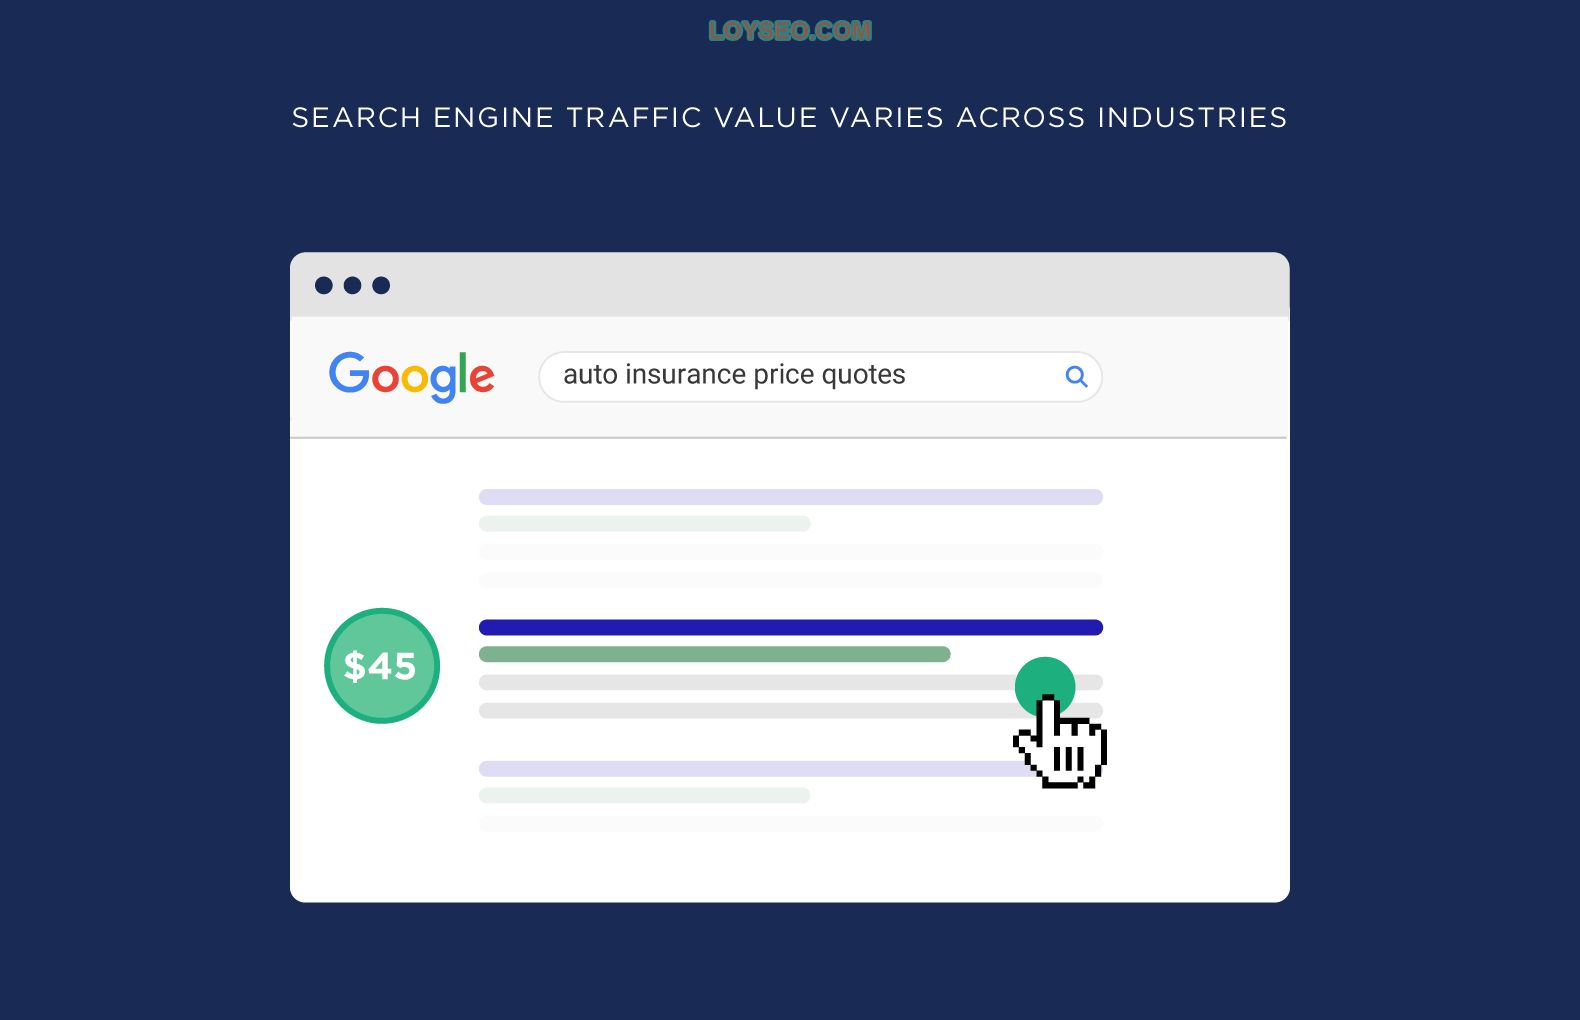 Search engine traffic value across industries